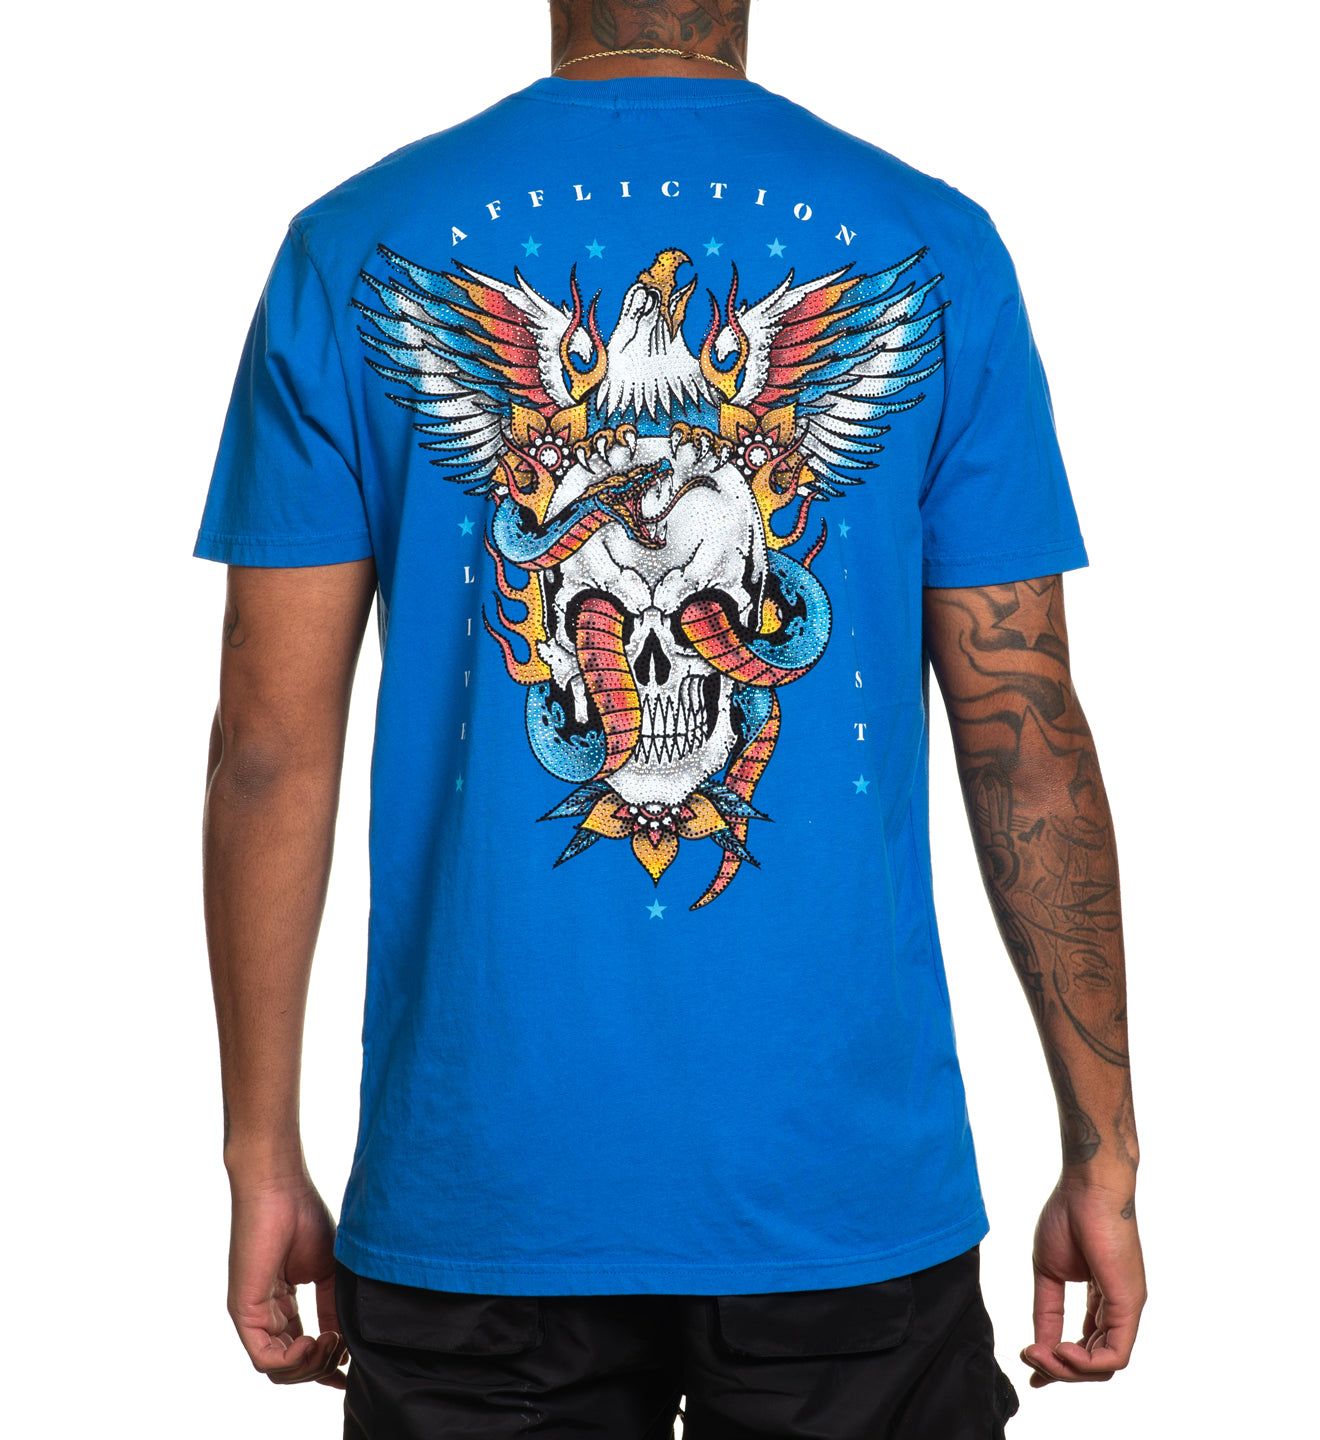 Sky Fire - Affliction Clothing